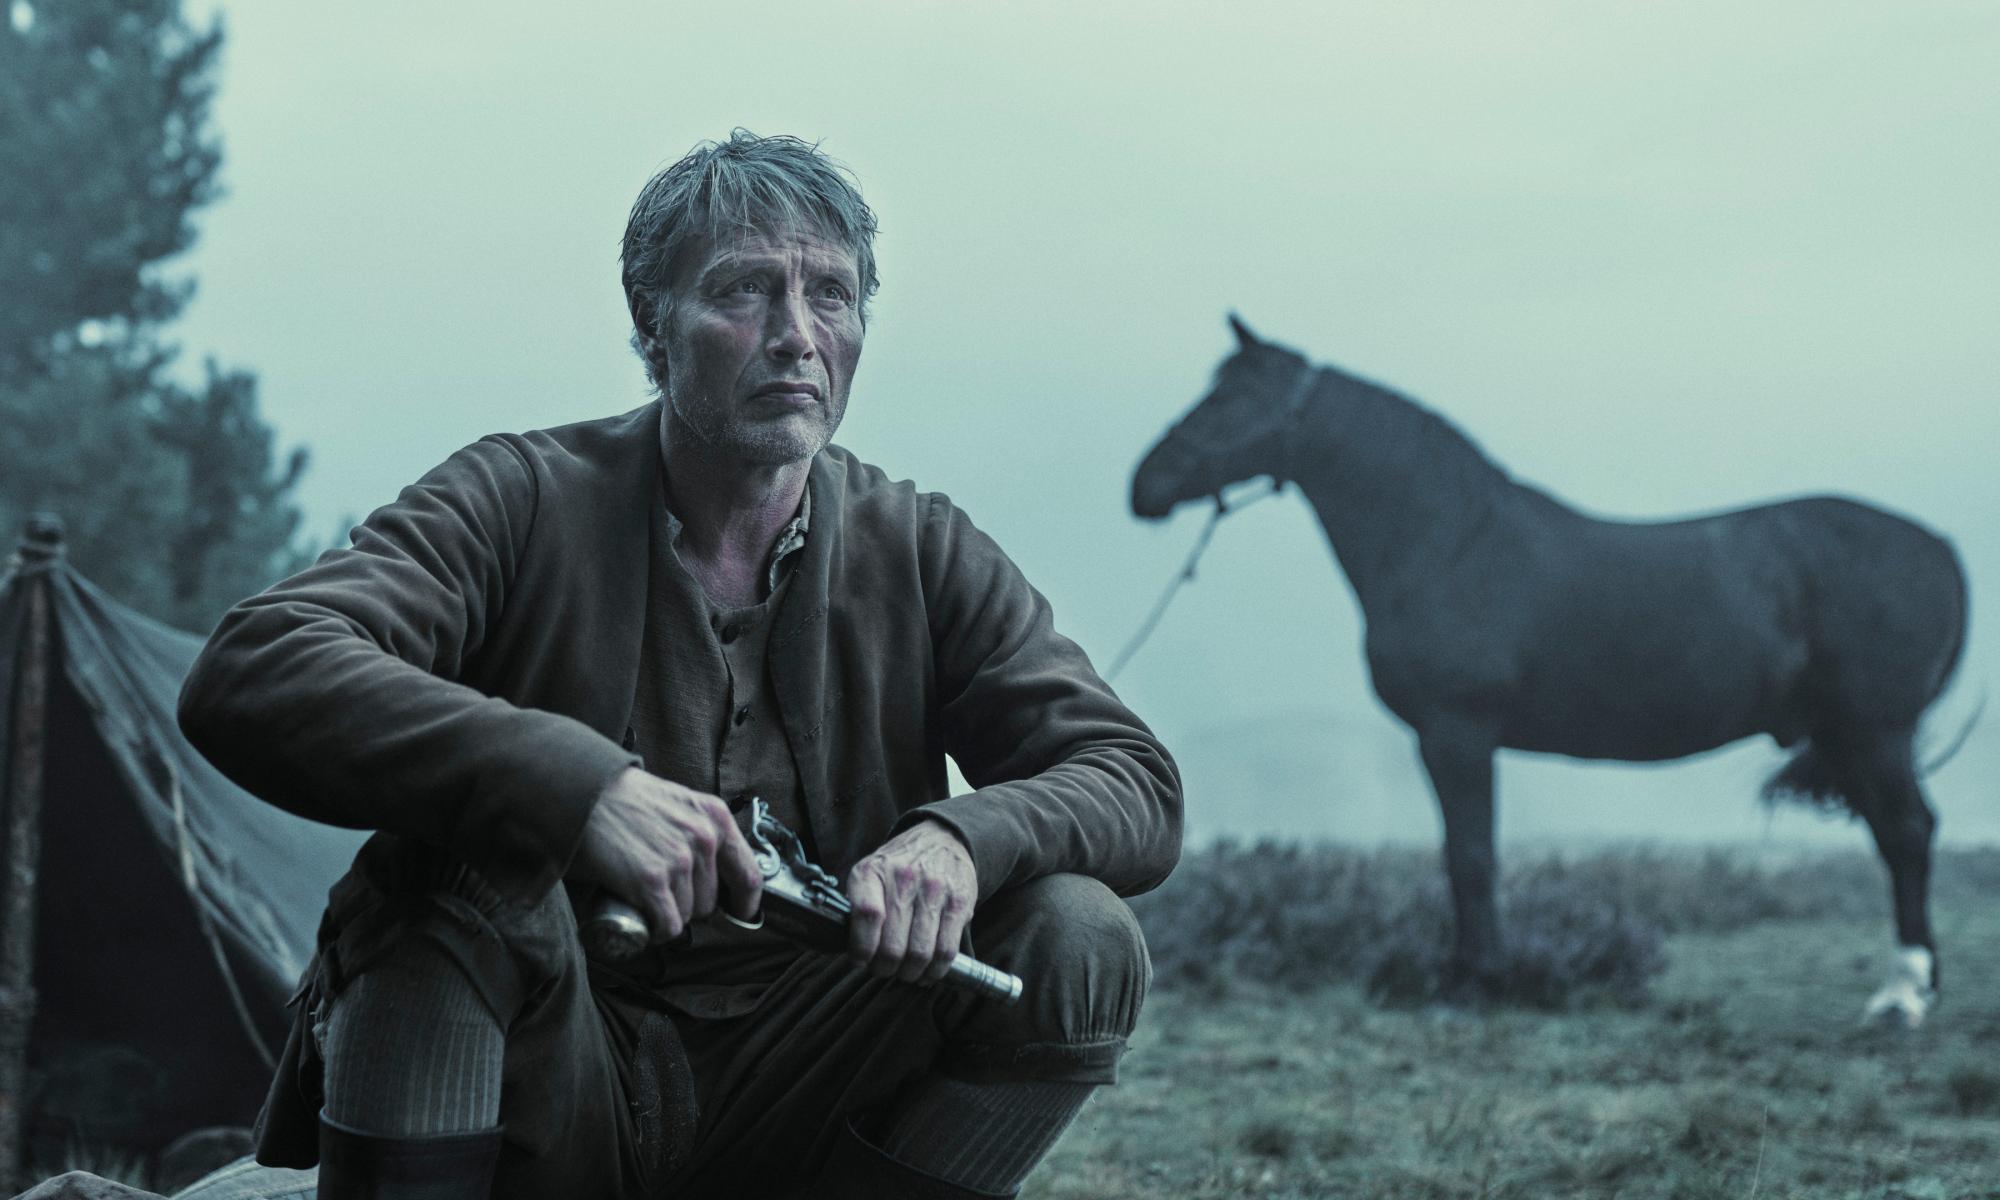 the promised land review – mads mikkelsen stars in enjoyably gritty nordic western